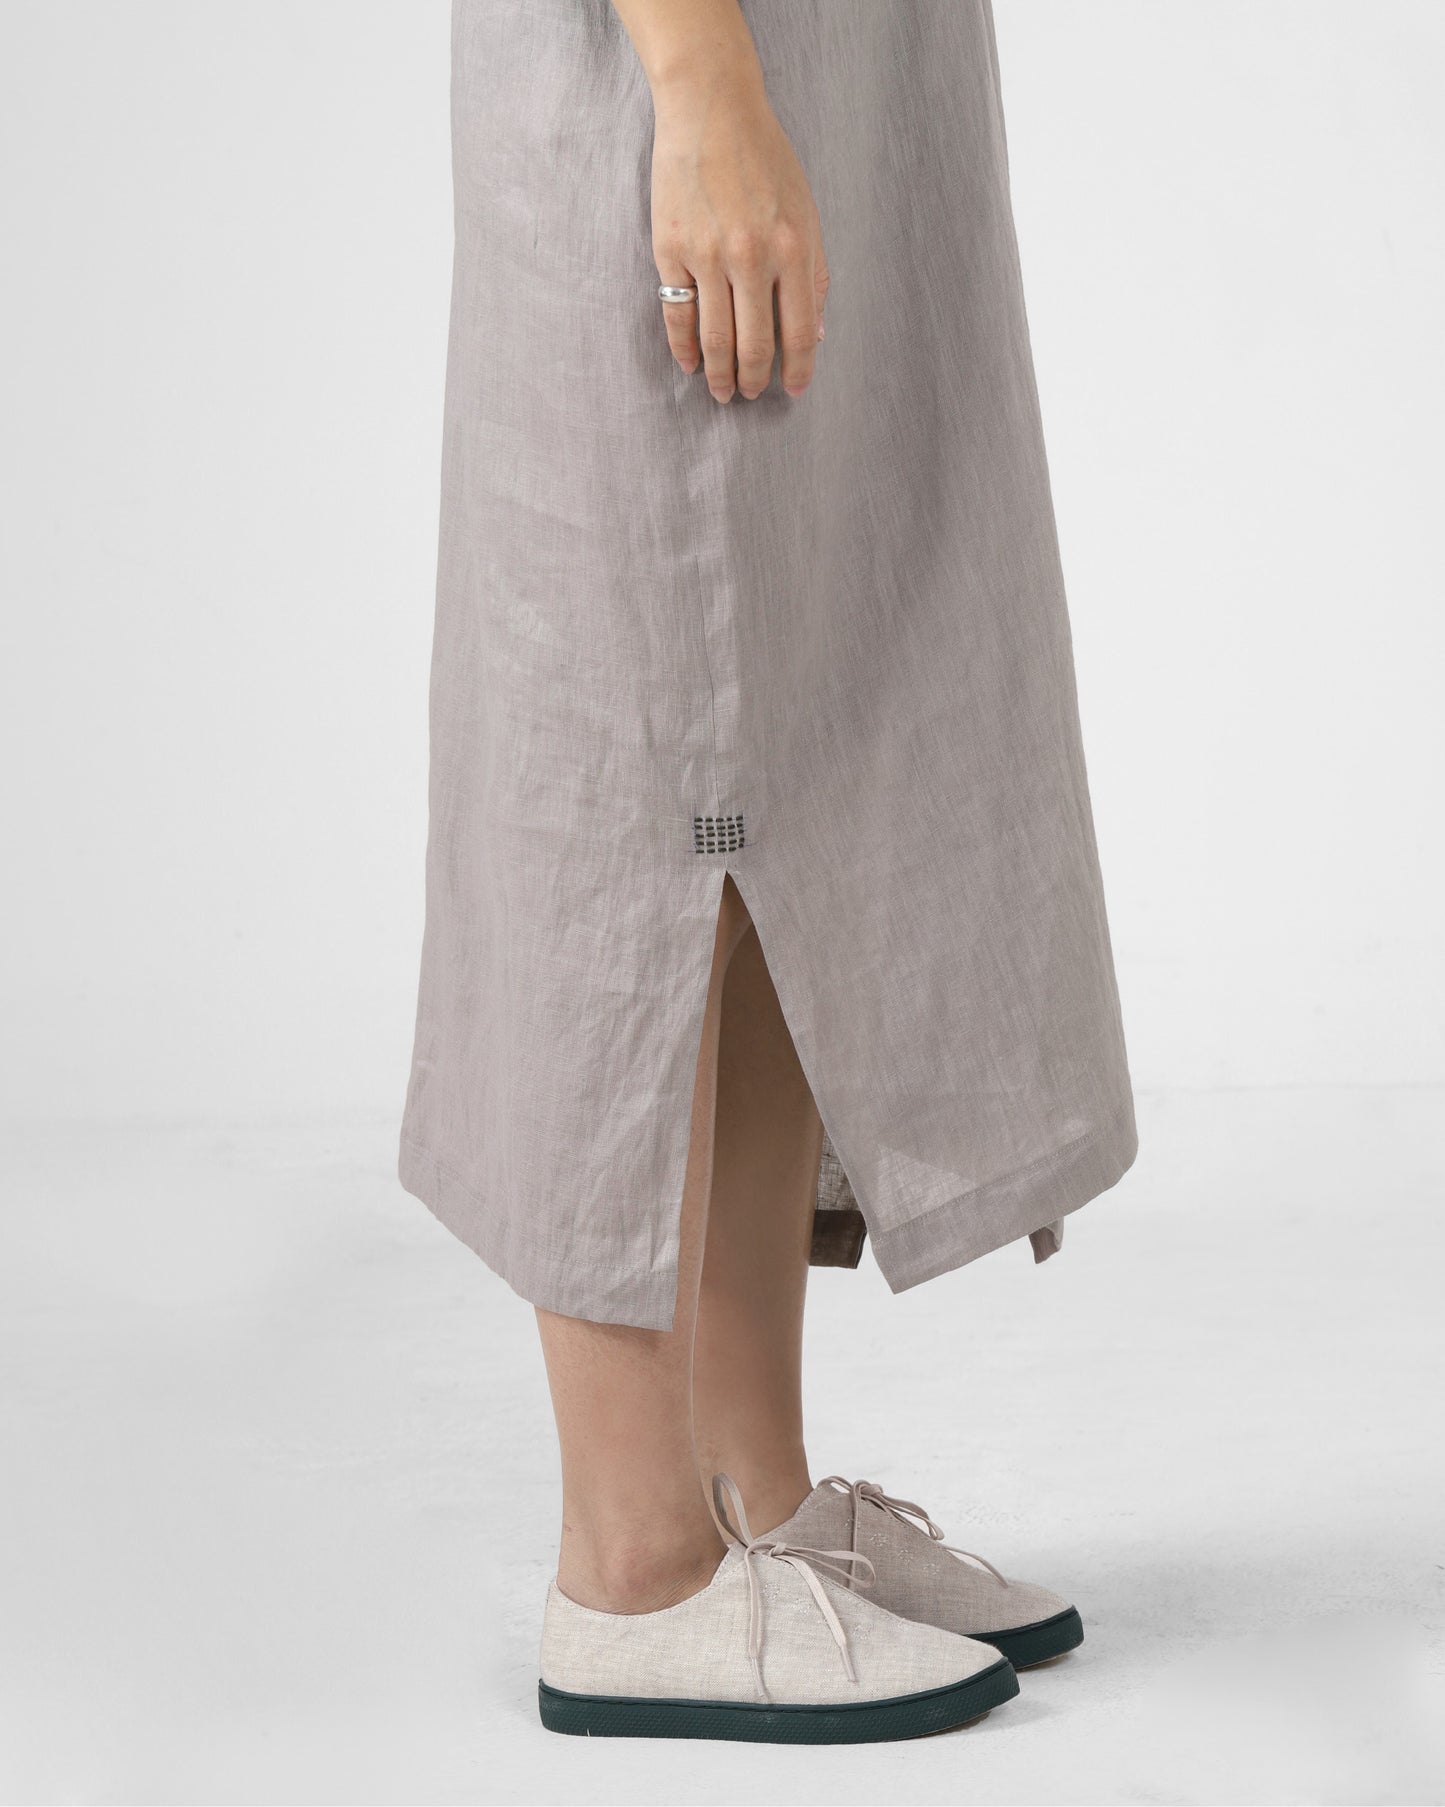 Hand-embroidered cross-collar Linen Washed dress